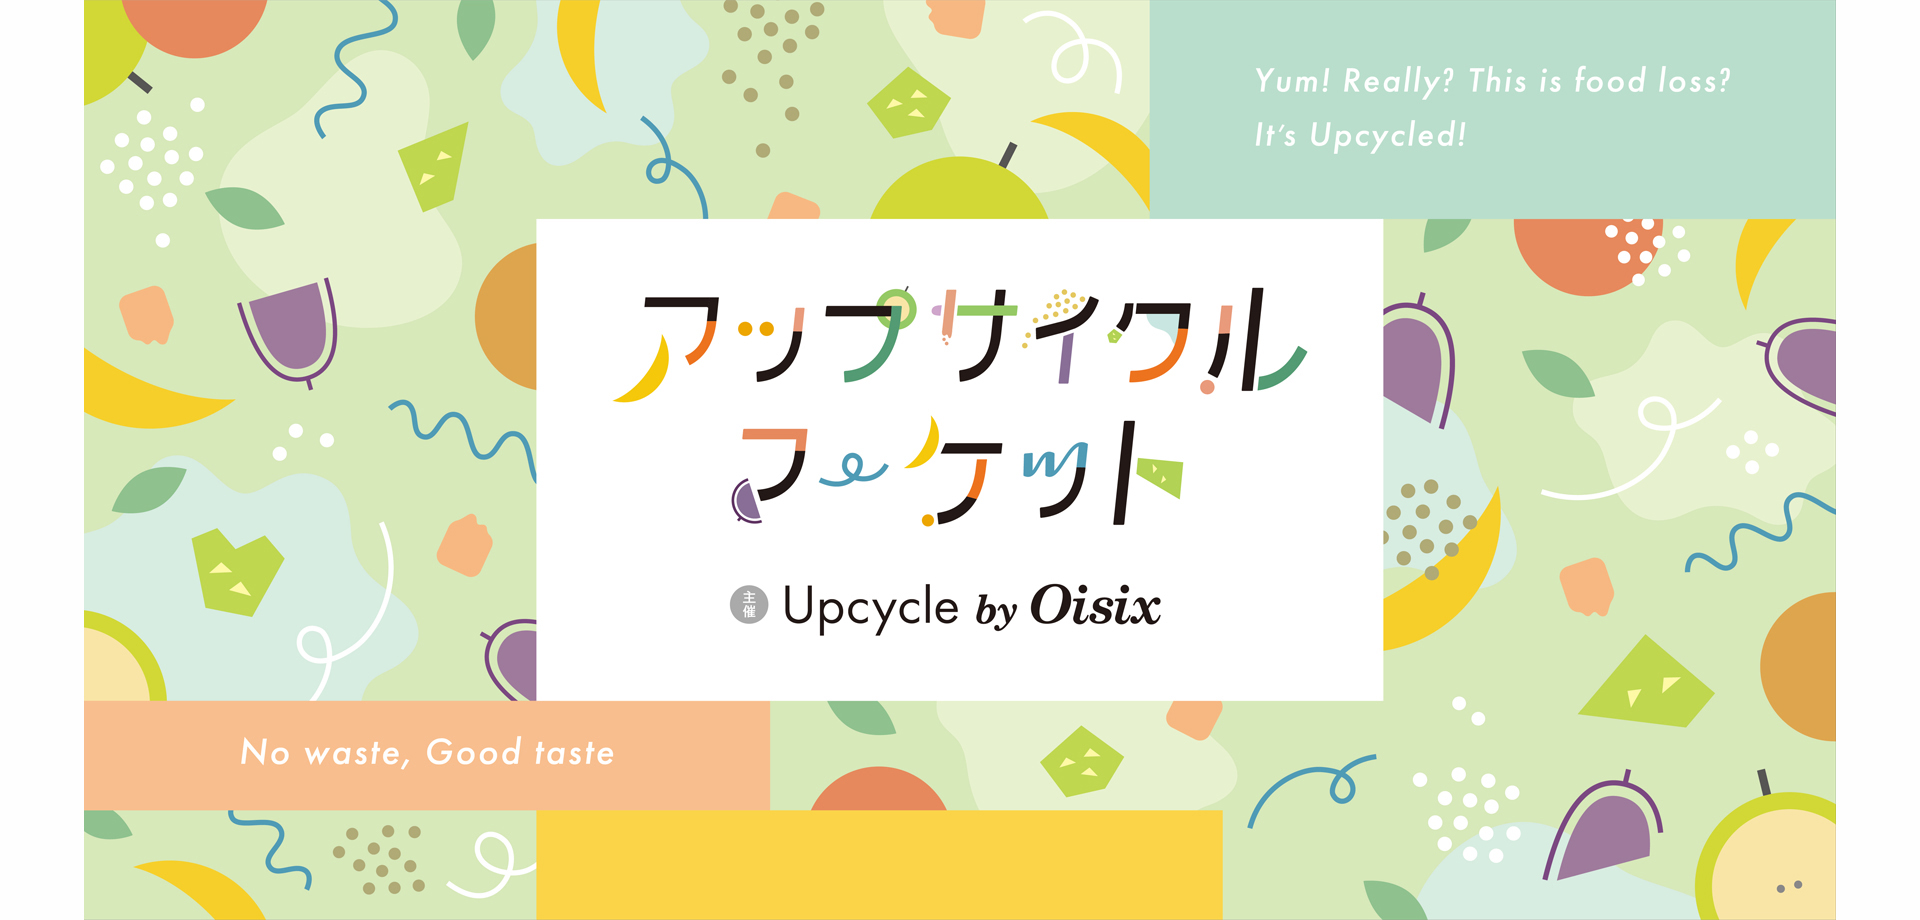 「Upcycle by Oisix」期間限定コンセプトショップ アップサイクルマーケット